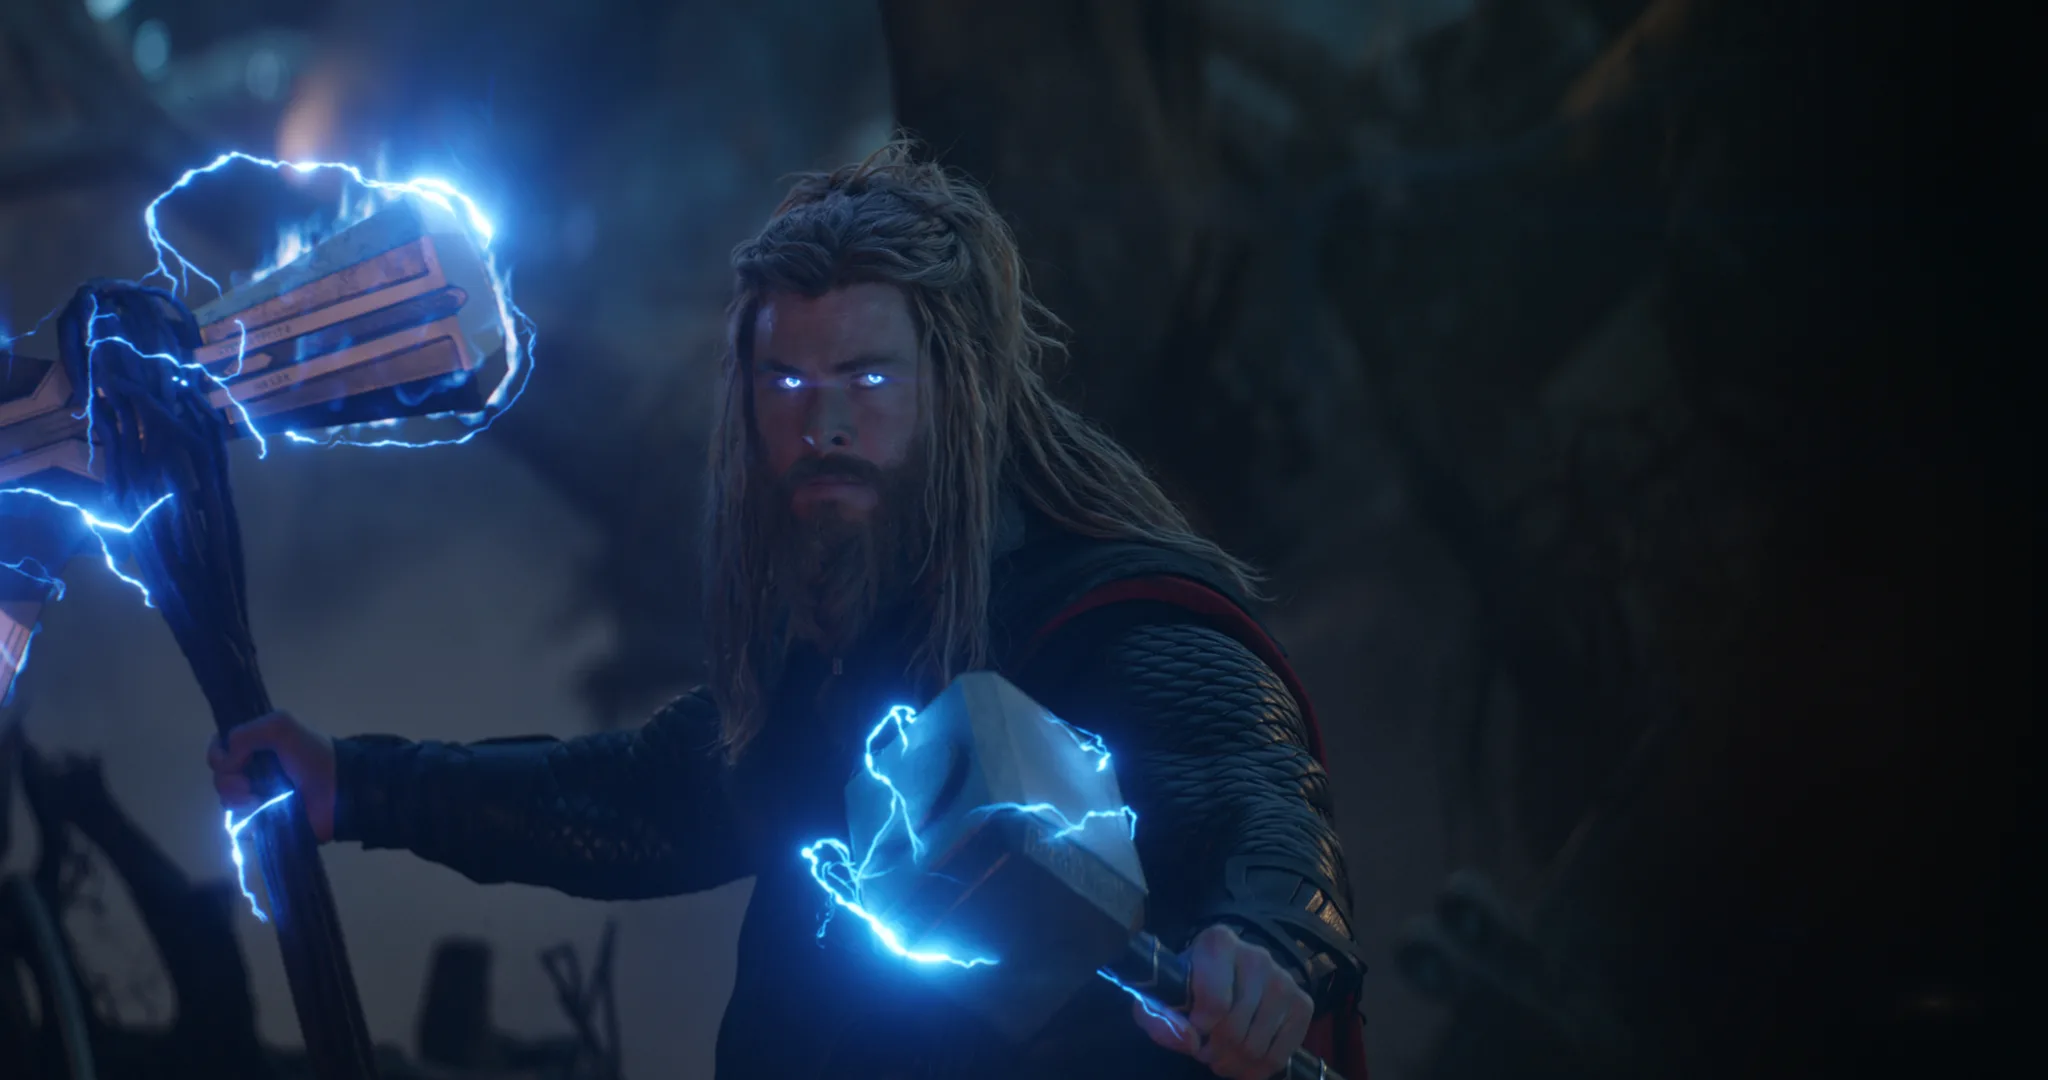 God of Thunder, Thor, in MCU (Marvel Cinematic Universe)